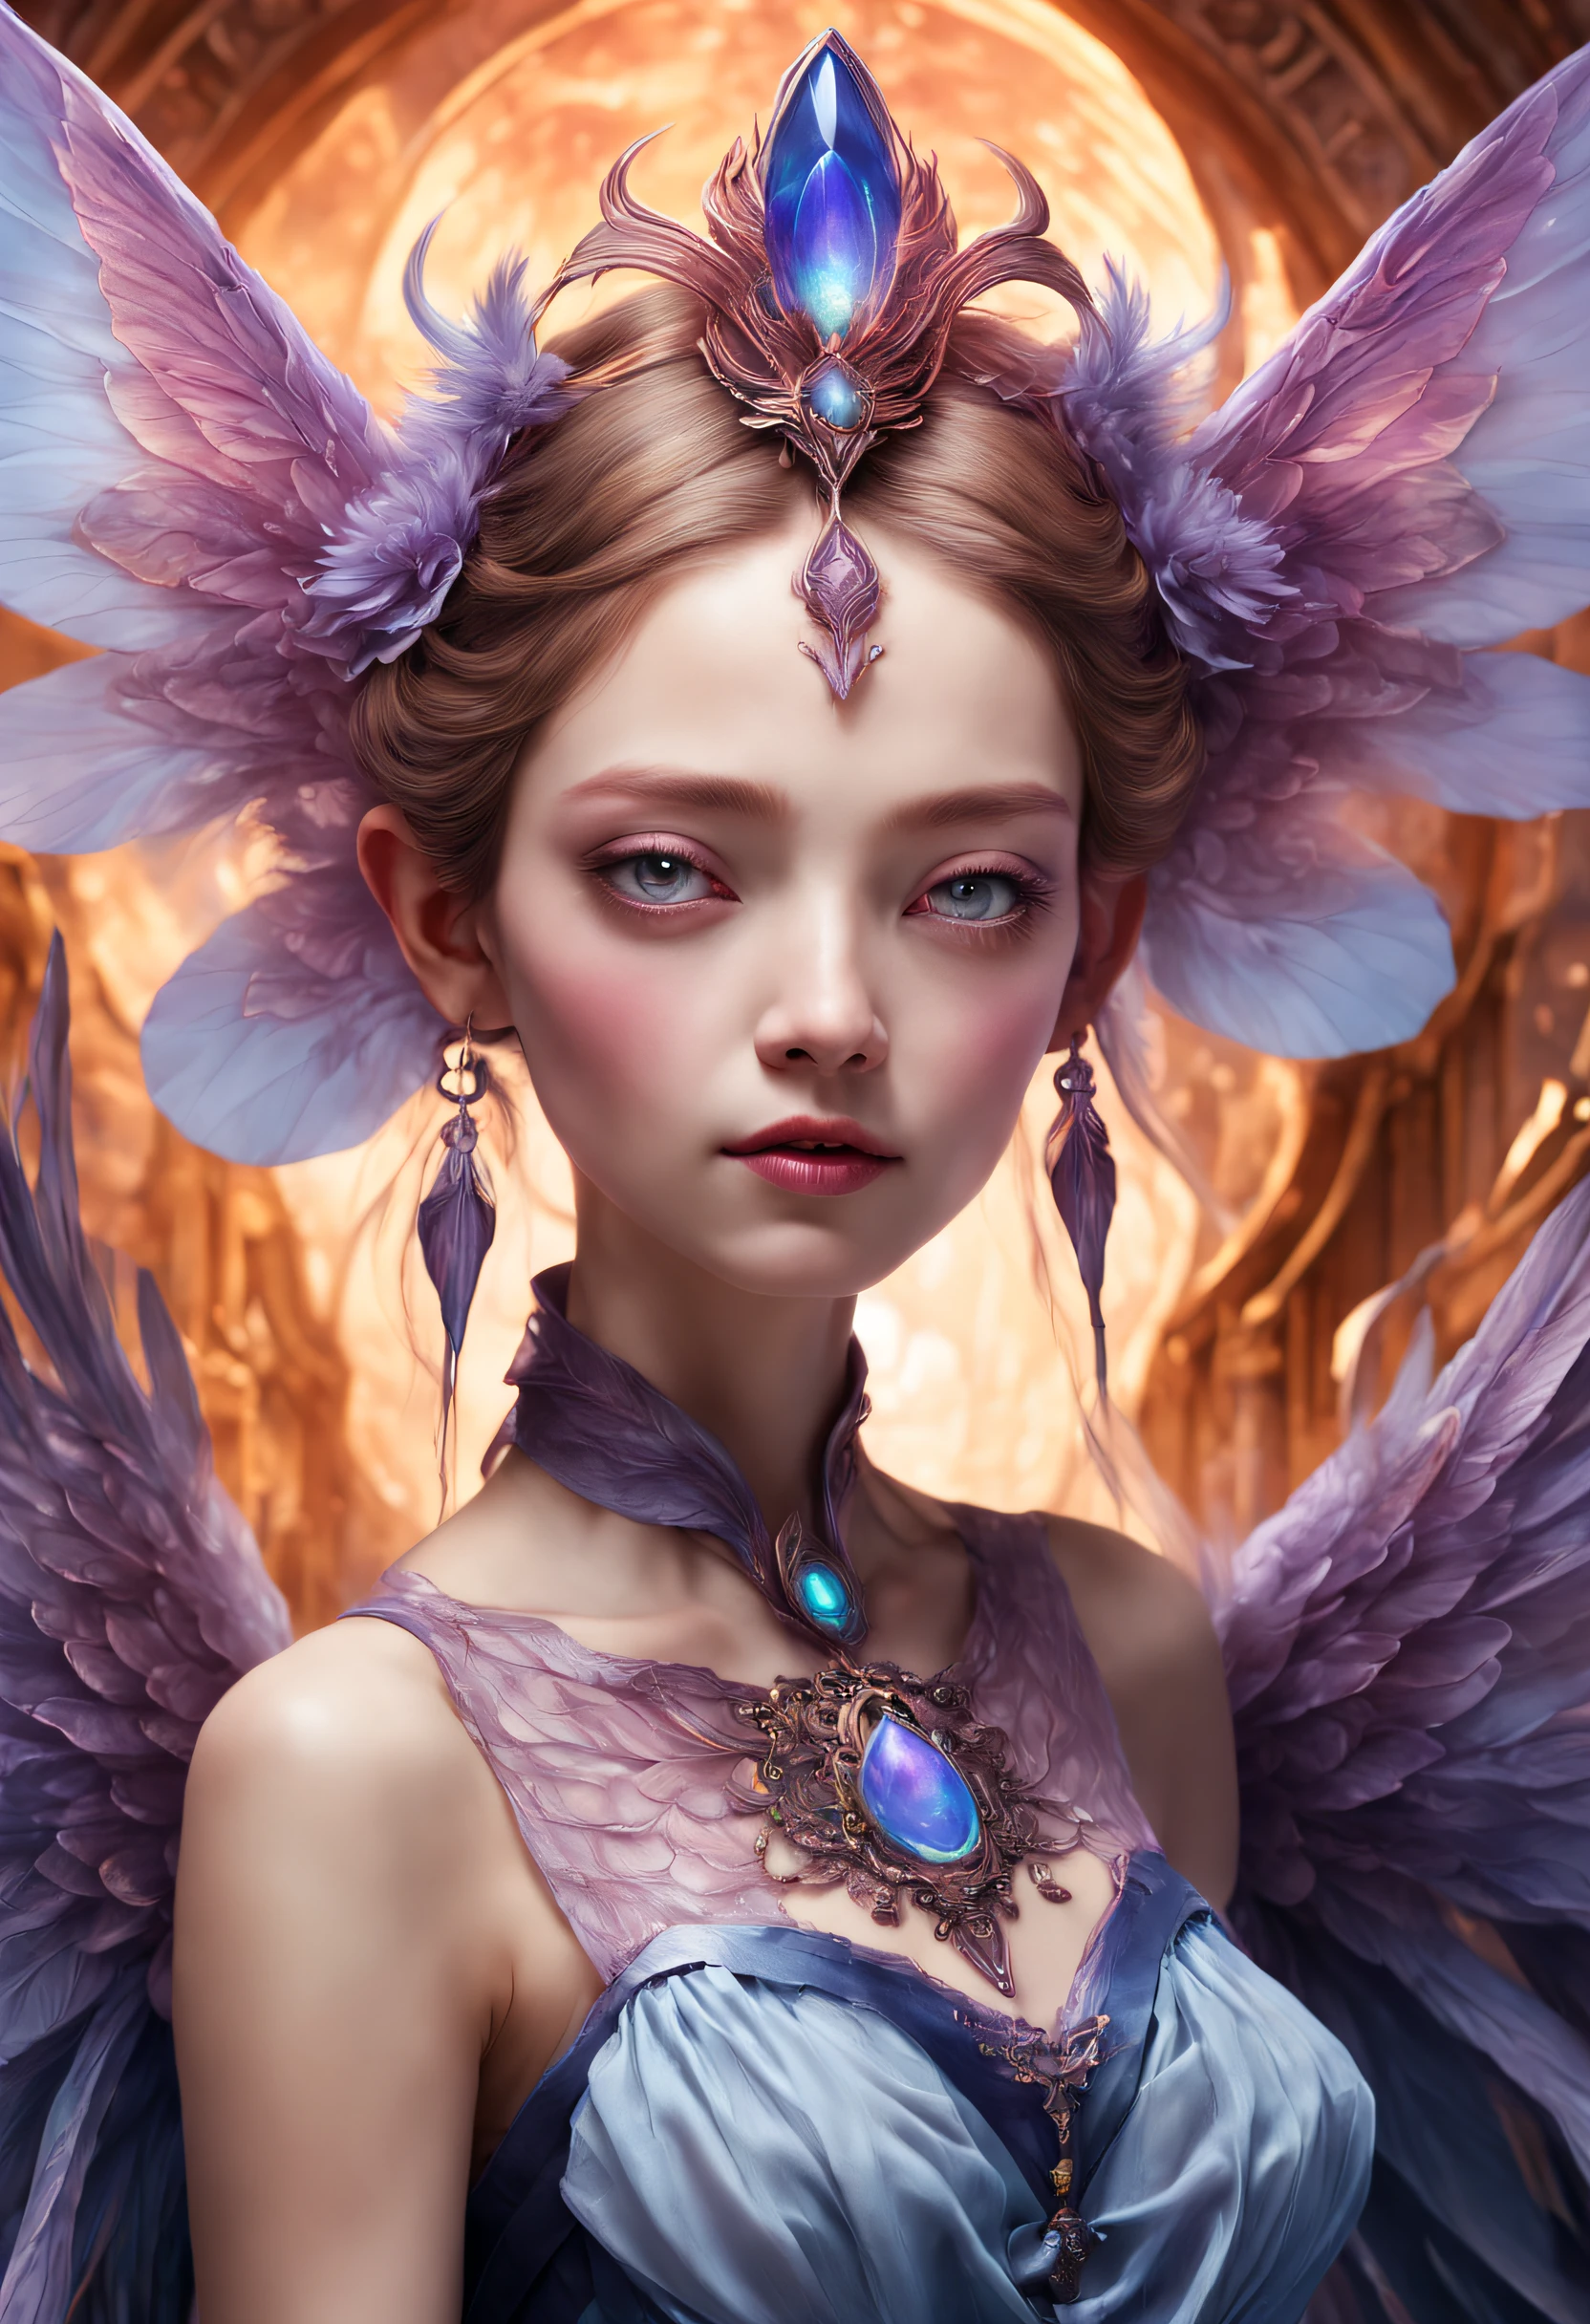 ((best quality)), ((masterpiece)), ((realistic,digital art)), (hyper detailed), Bl00m1ngF41ry female Sylph, humanoid elemental being, delicate and ethereal beings with gossamer wings, guardians of the air, mountain top,weather, Elderly, Broad, Southeast Asian, Violet eyes, Aquiline Nose, Receding Chin with Cleft, Receding Jaw, Round Cheeks, , Indigo Feathered haircut hair, Insecurity, Shrouding allies in protective auras, enhancing their defenses, wearing Flare skirt, Toile Embroidered top, , Feather fascinator with netting, and and Enliven (Radiating,Eraser,Advanced Nanocoolant Infrastructure Convection,Temporality,Ferromagnetic,Turbulence,Pyramid,Cross ,Perpendicular liness,Wavy lines,Galactic anomalie,Manganese Violet Enveloping magic:1.0), Pouring over ancient manuscripts, uncovering lost knowledge, Faerie Glow,